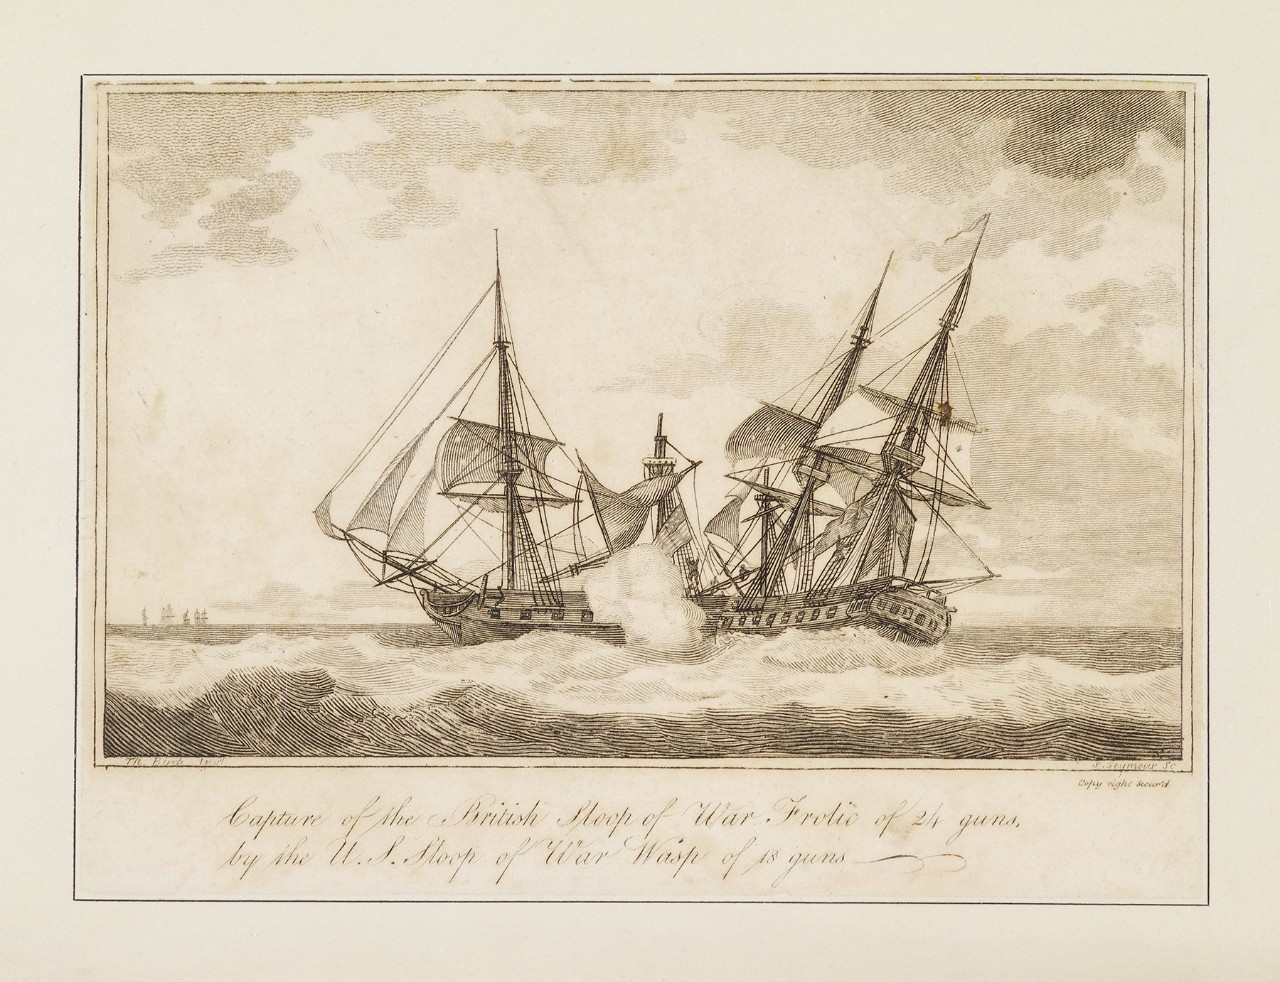 Two sailing ships in heavy seas firing at each other at close range